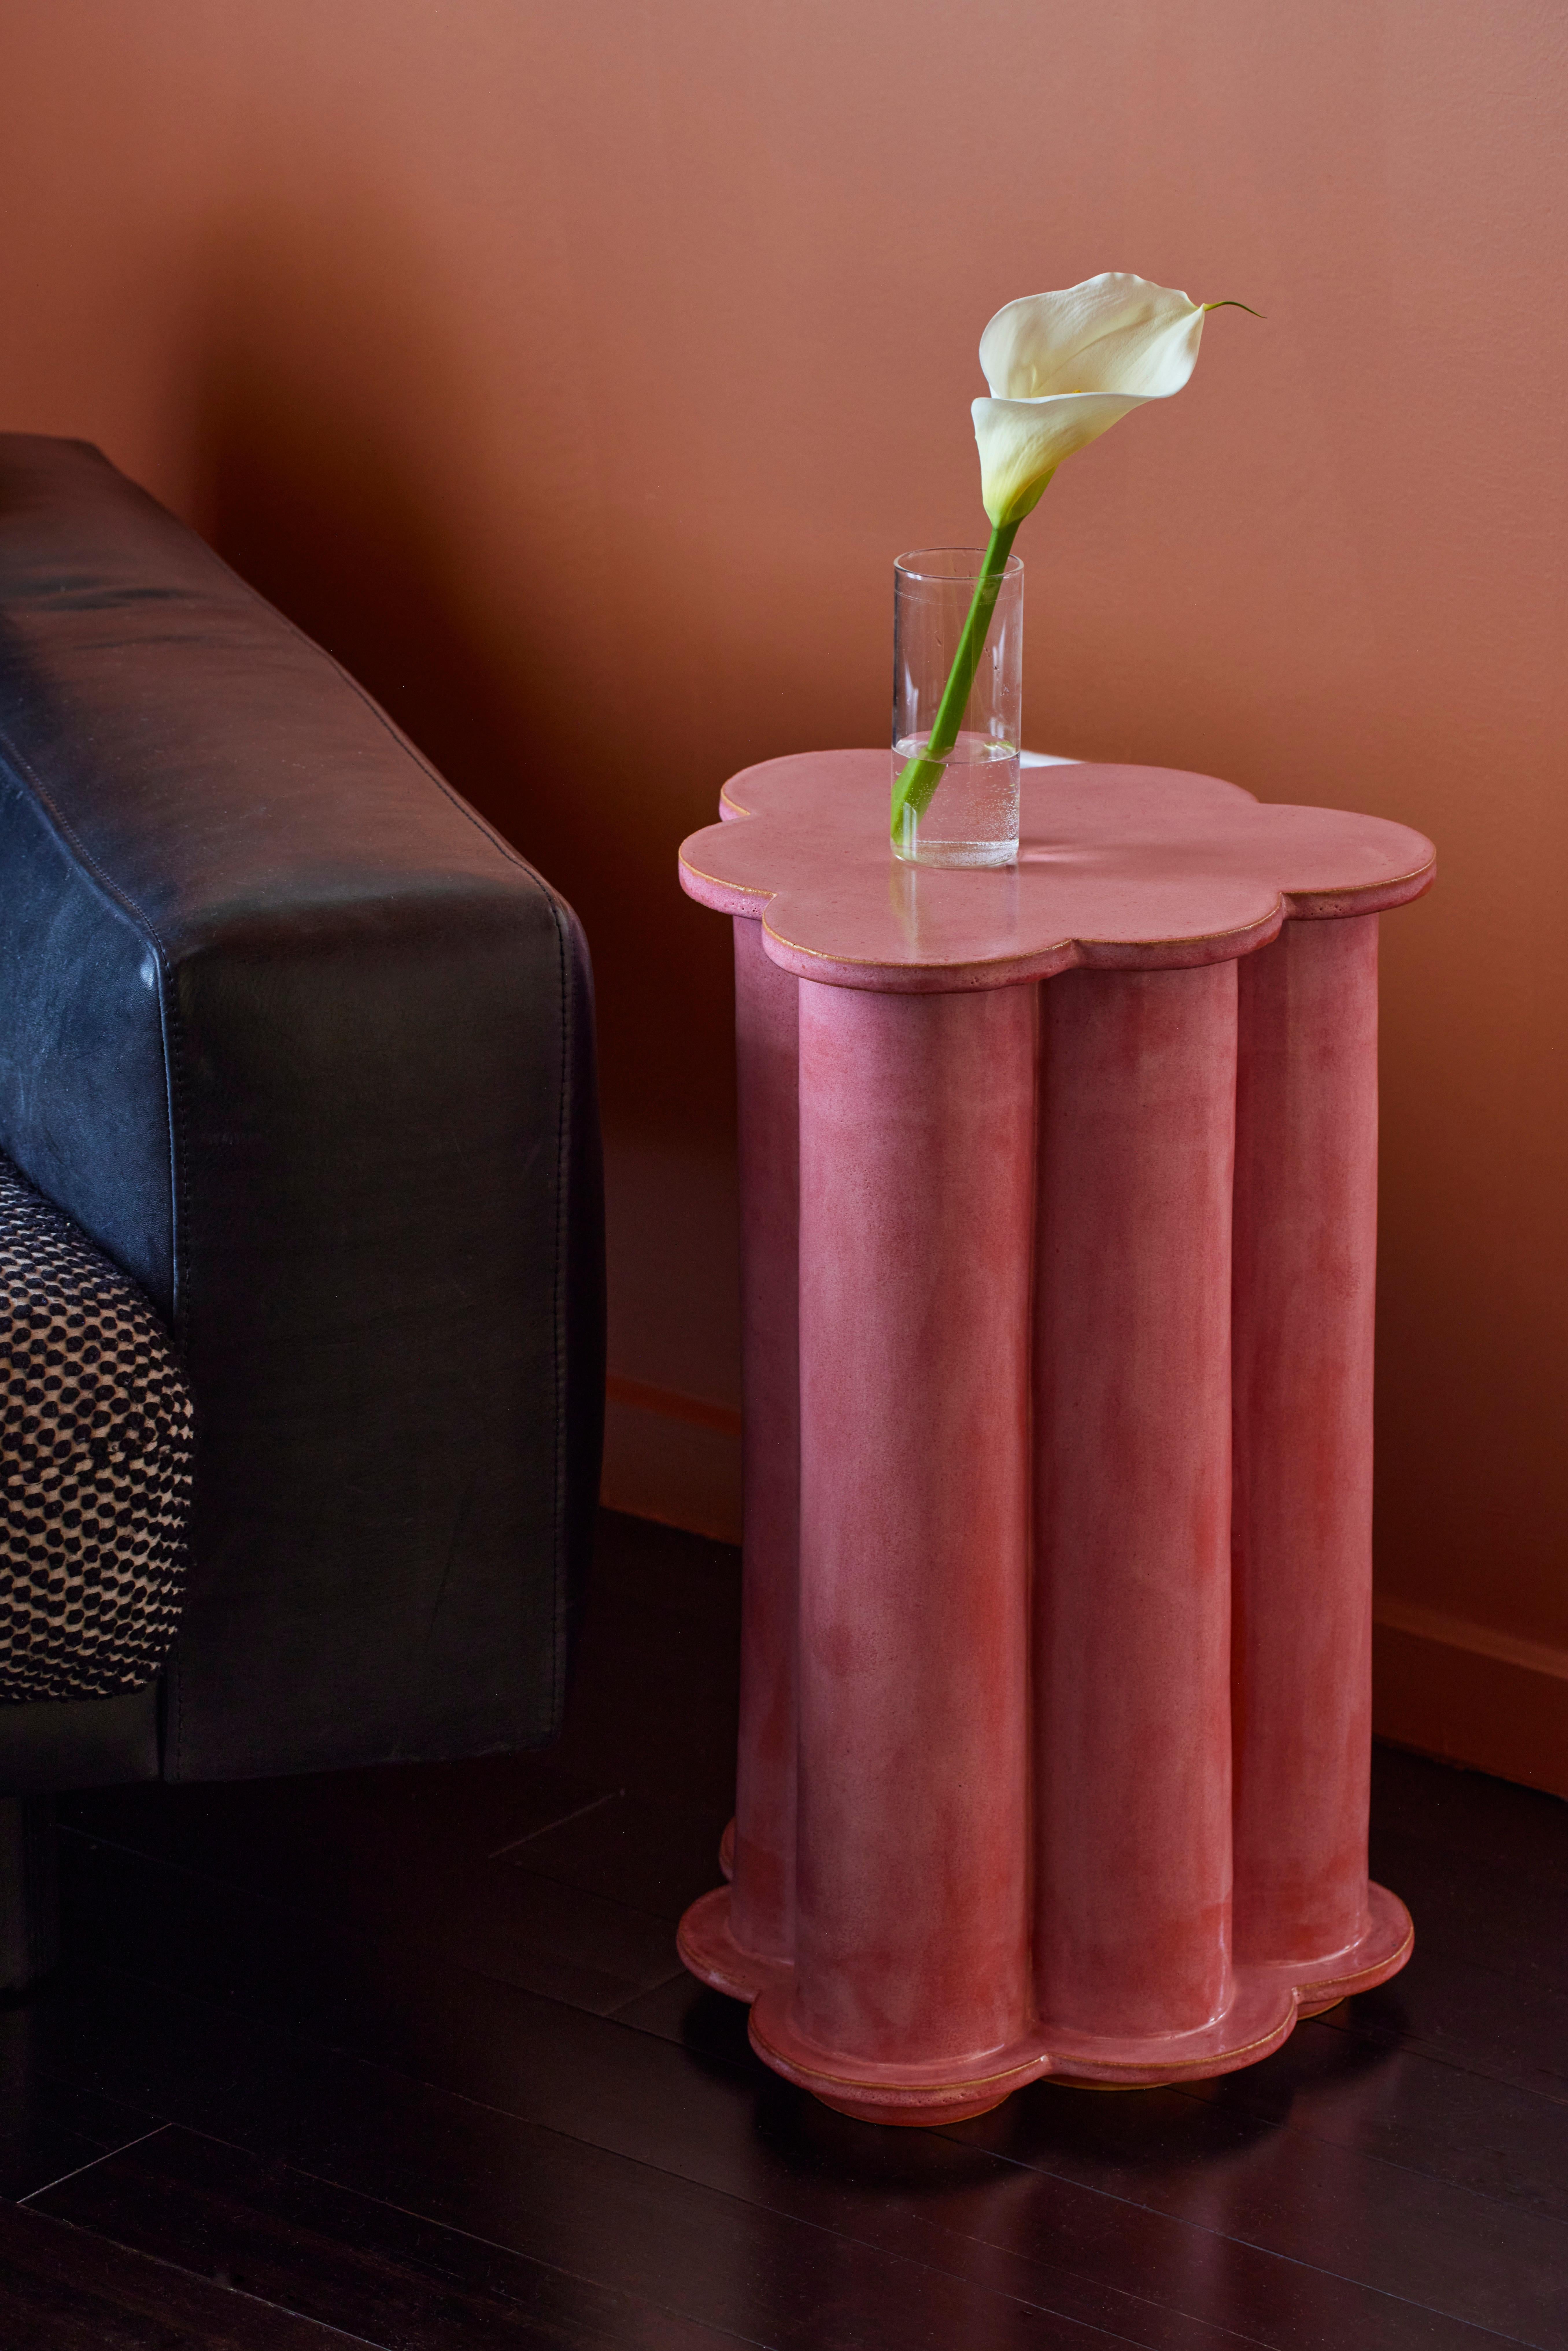 Tall Ruffle ceramic side table in Sunset Pink. Made to order. 

BZIPPY ceramic goods are one-of-a-kind stoneware / earthenware editions including furniture, planters and home accessories. 

Each piece is designed, hand-built, glazed, and fired